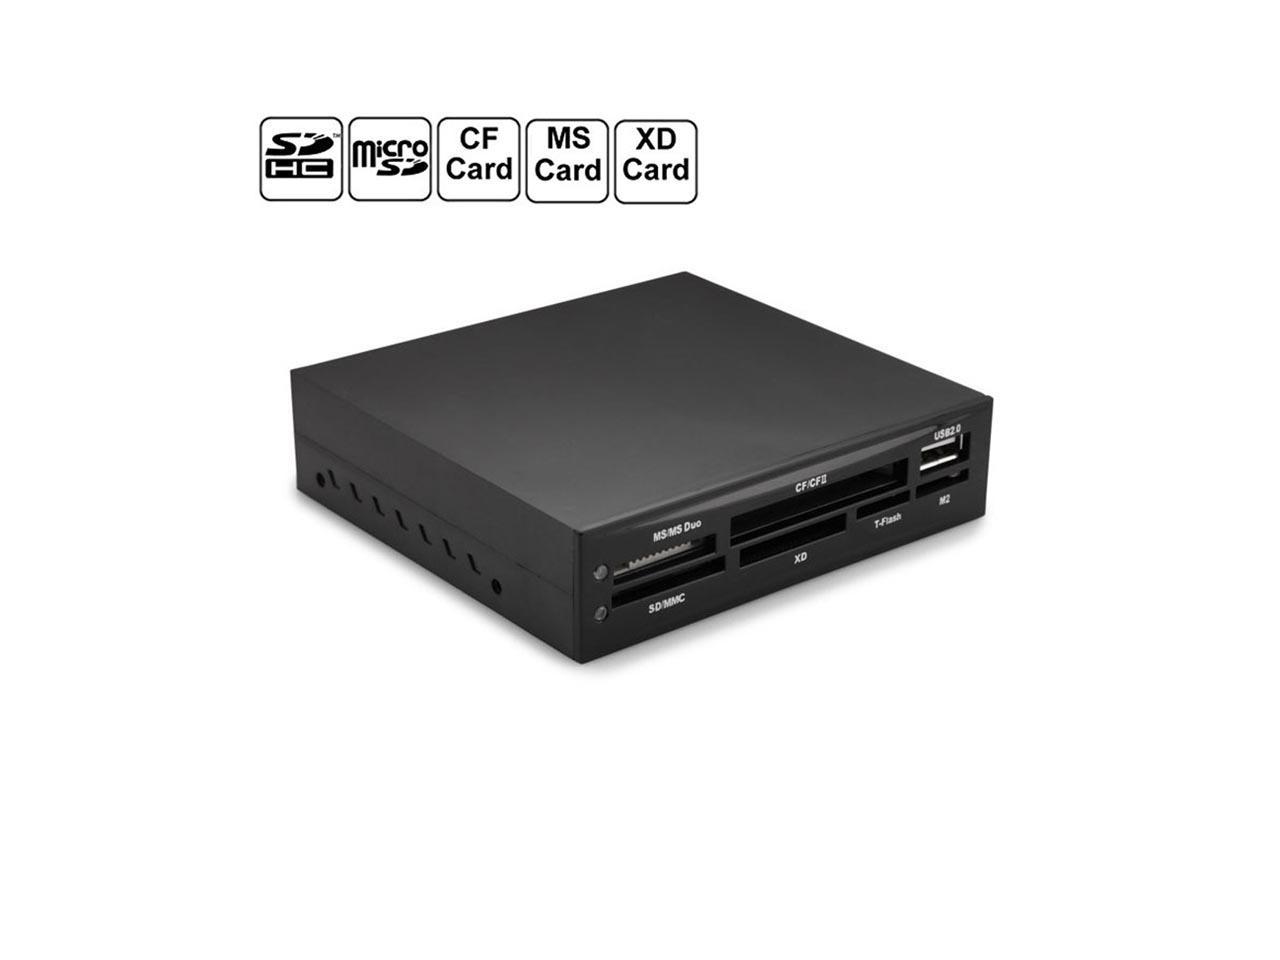 1x Aluminum CASE USB 2.0 ALL-in-1 Card Reader for Micro SD/MMC/SDHC/TF/M2/MS